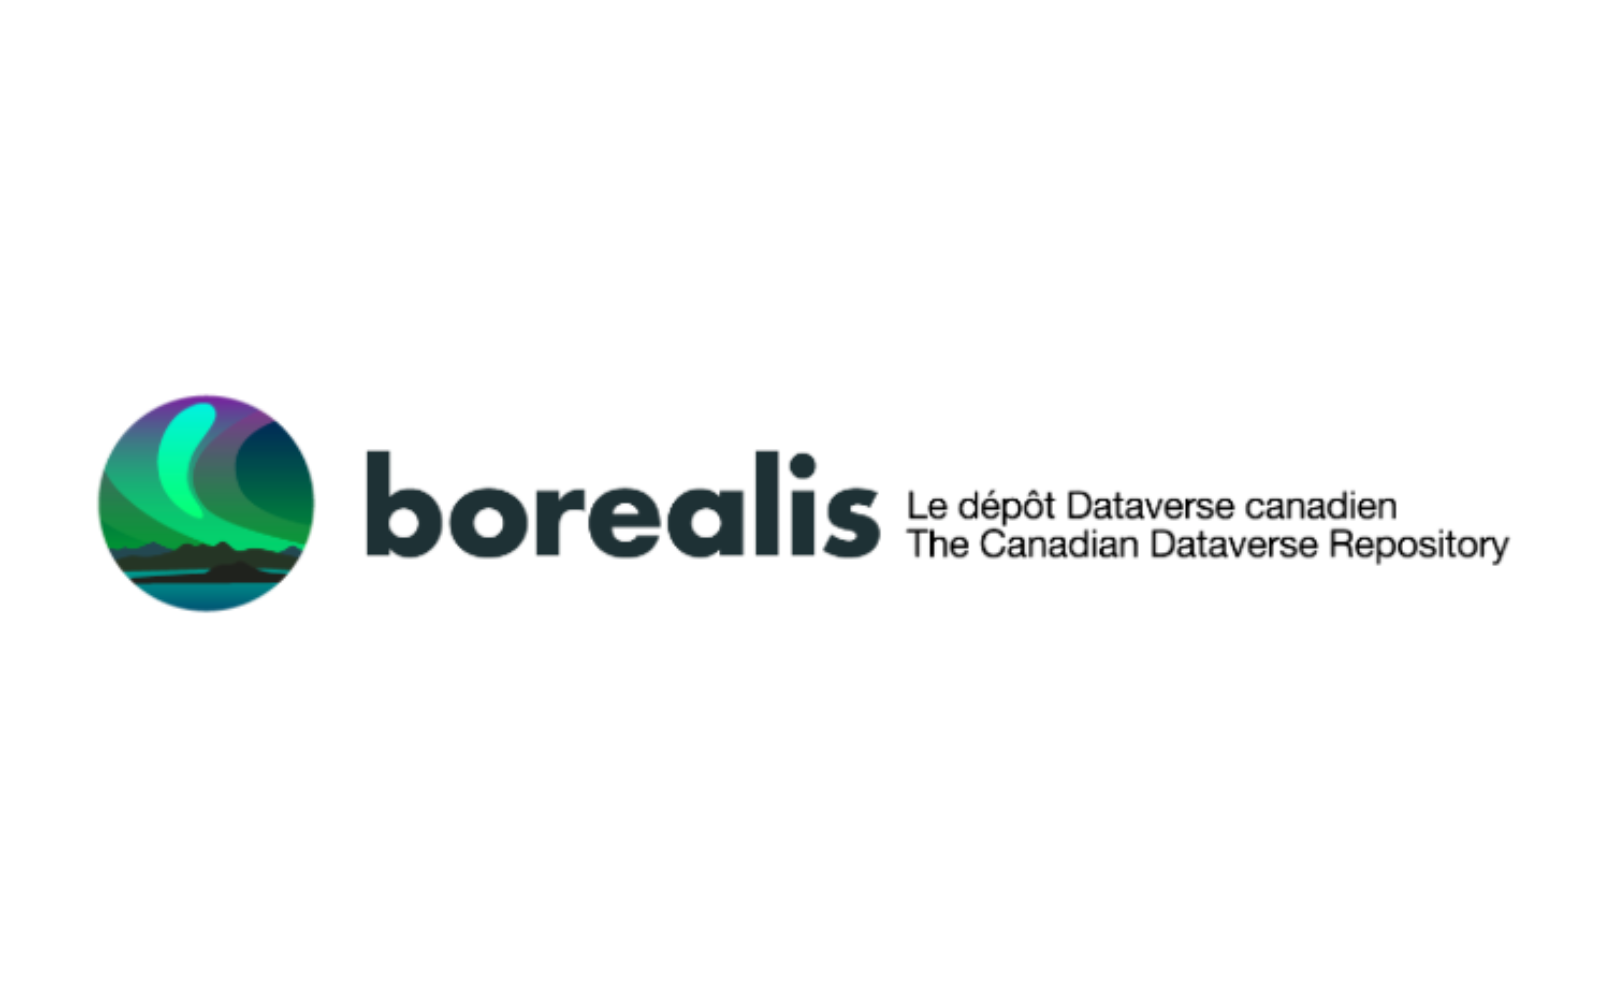 Borealis logo can be seen. Text reads: Borealis - The Canadian Dataverse Repository